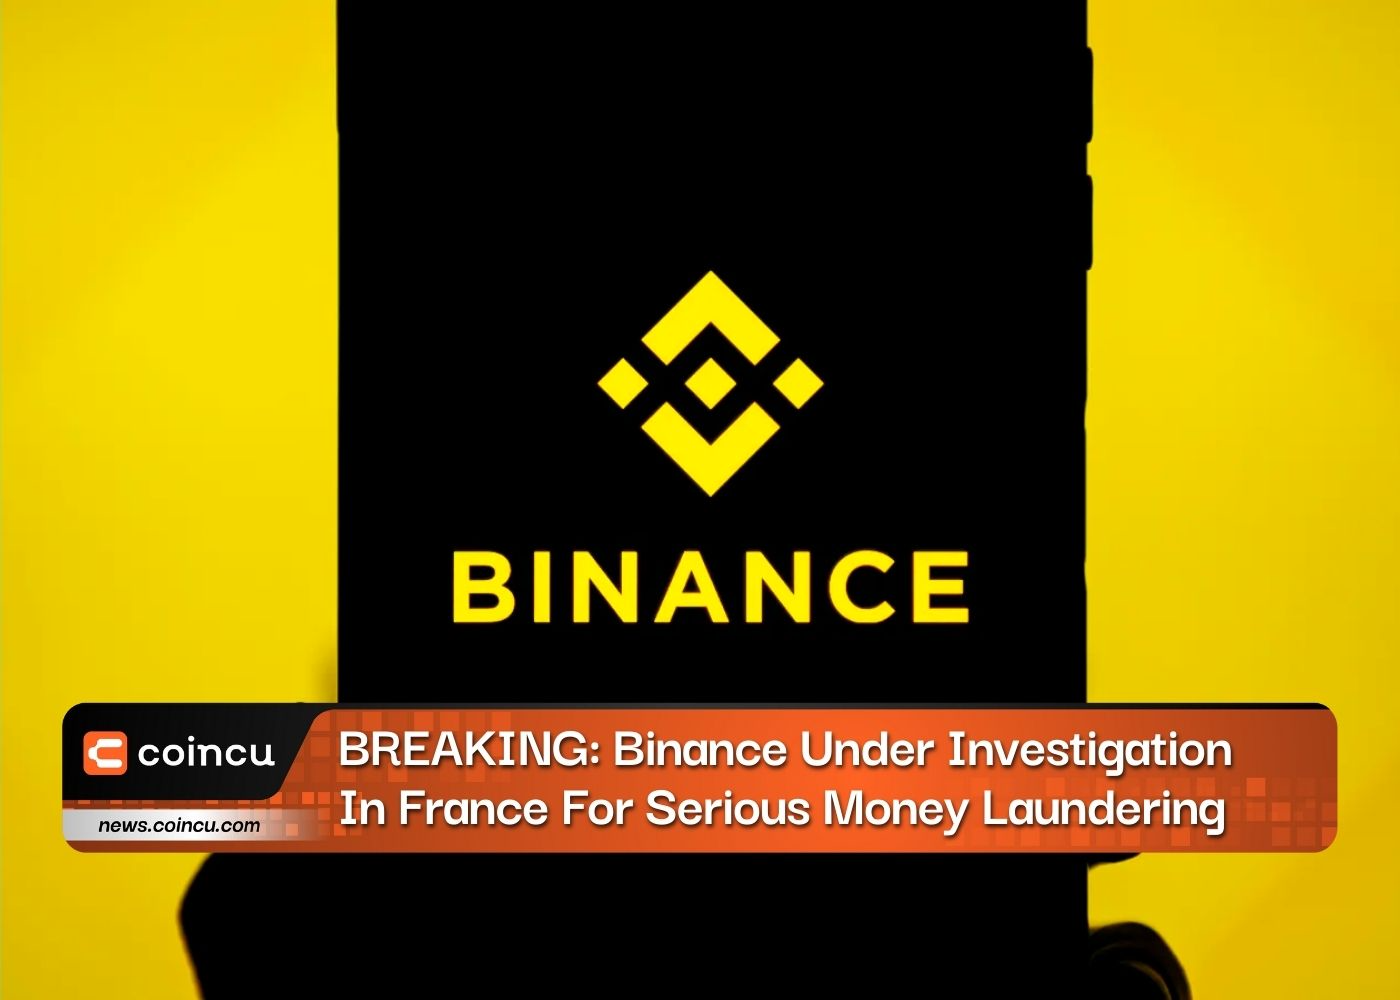 BREAKING: Binance Under Investigation In France For Serious Money Laundering